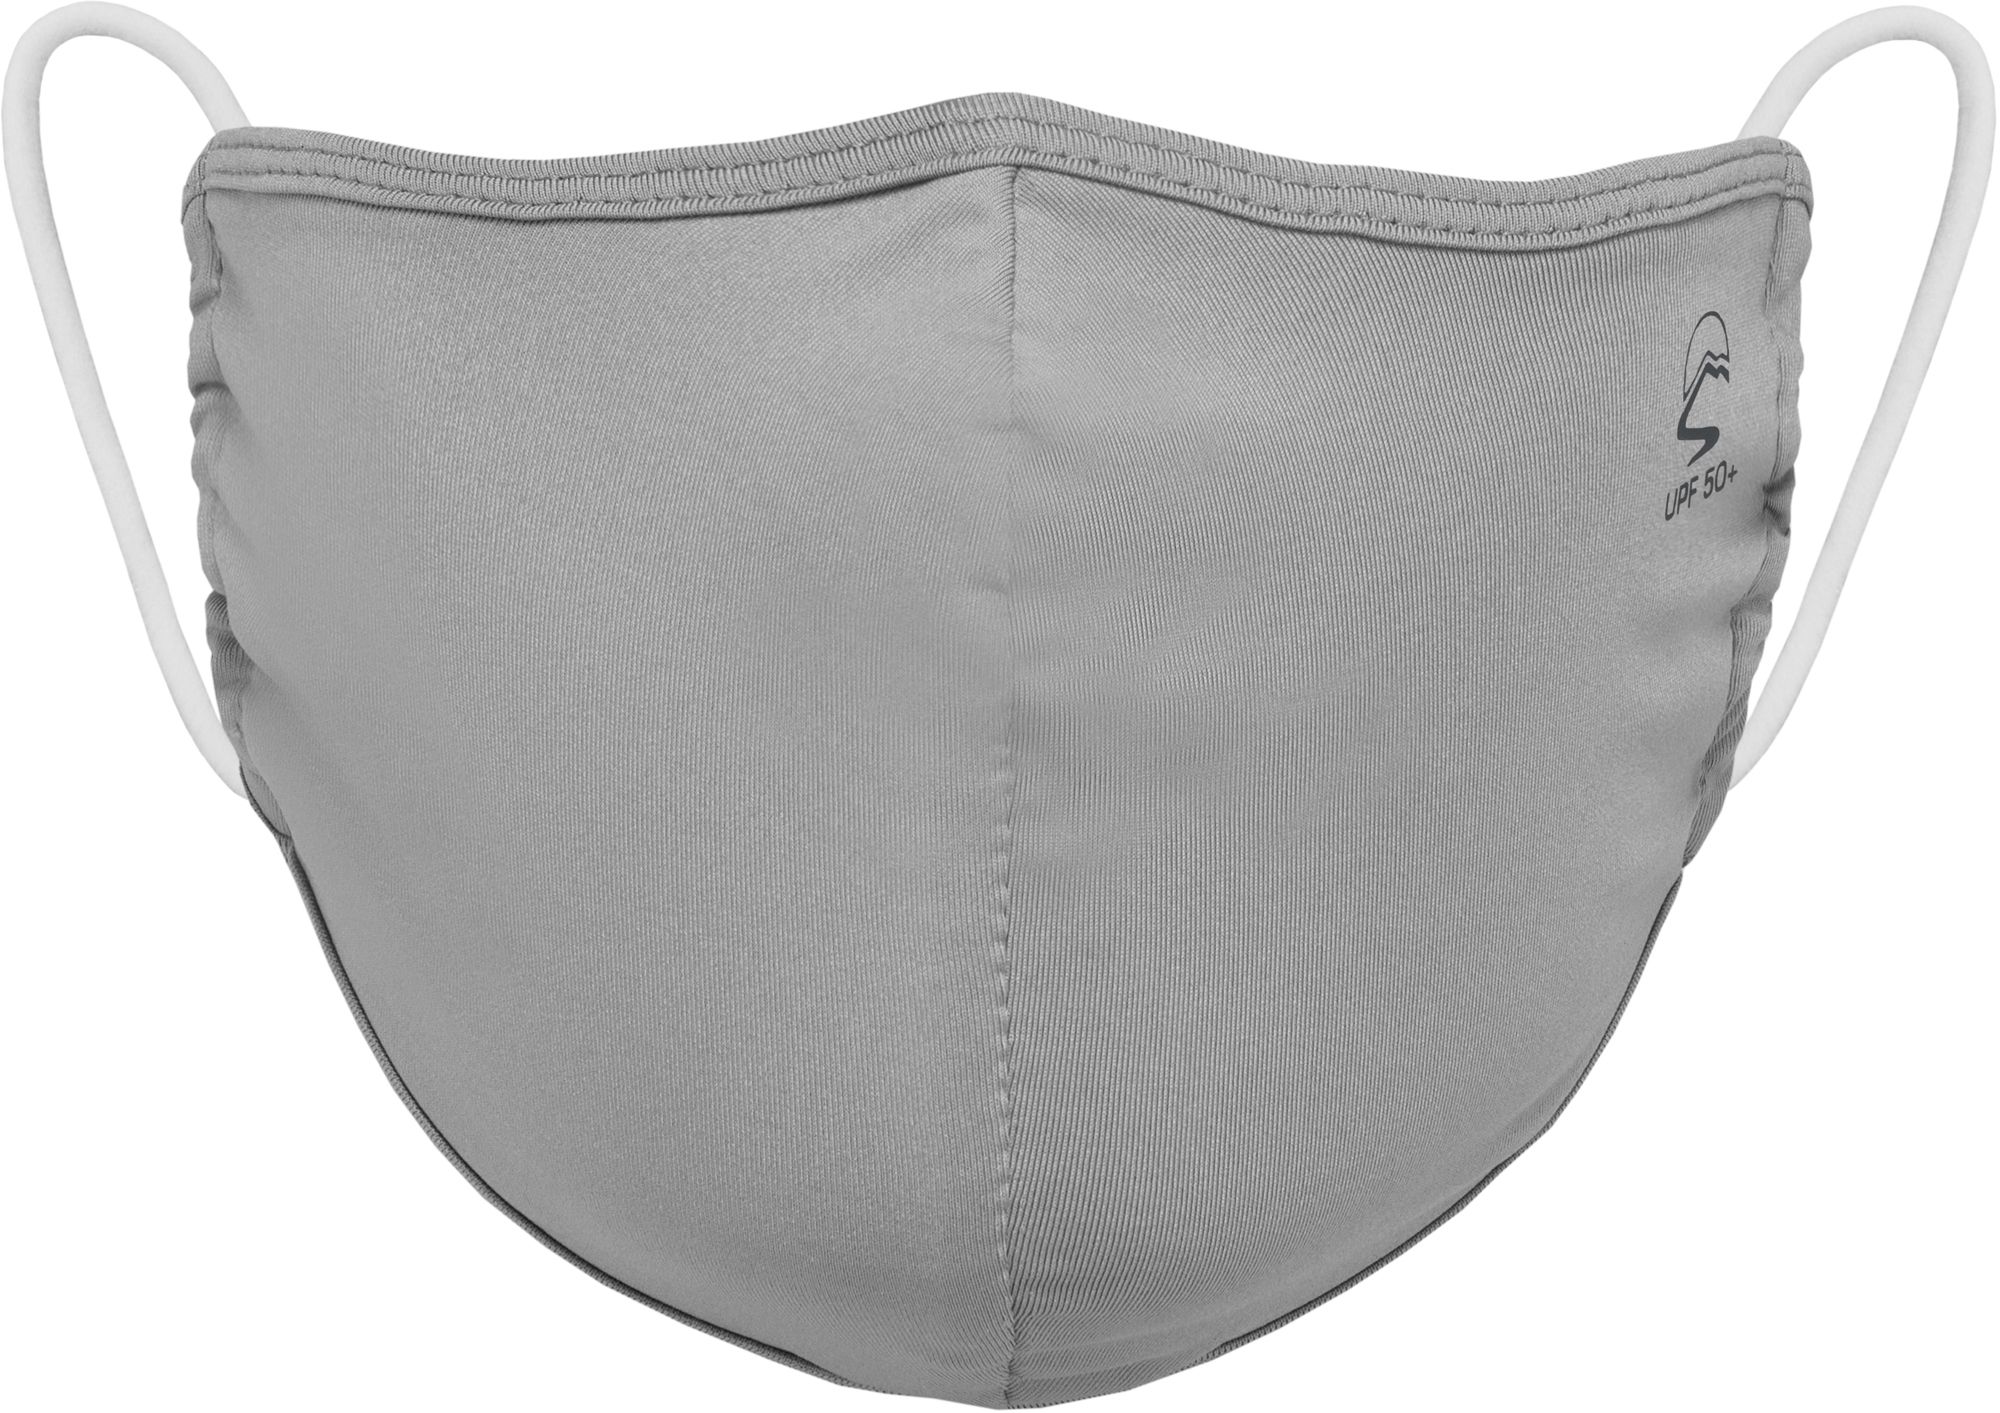 Sunday Afternoons Adult UVShield Cool Face Mask - 2 Pack